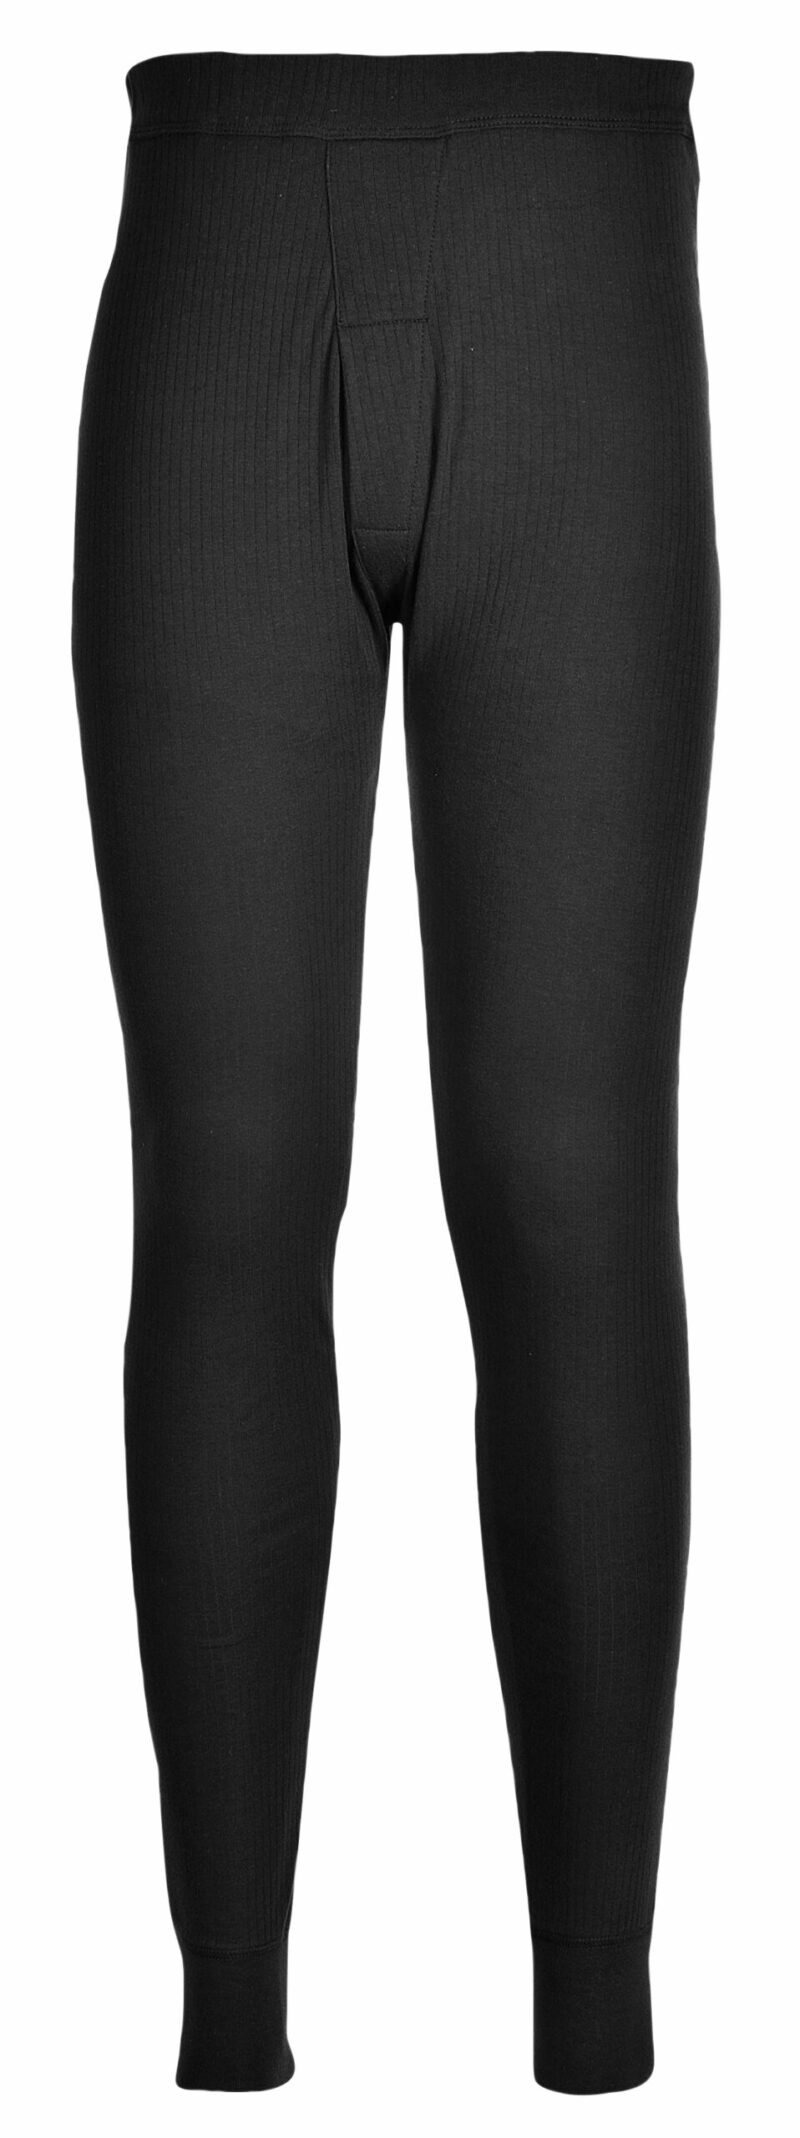 Portwest B121 Thermal Trousers-5949